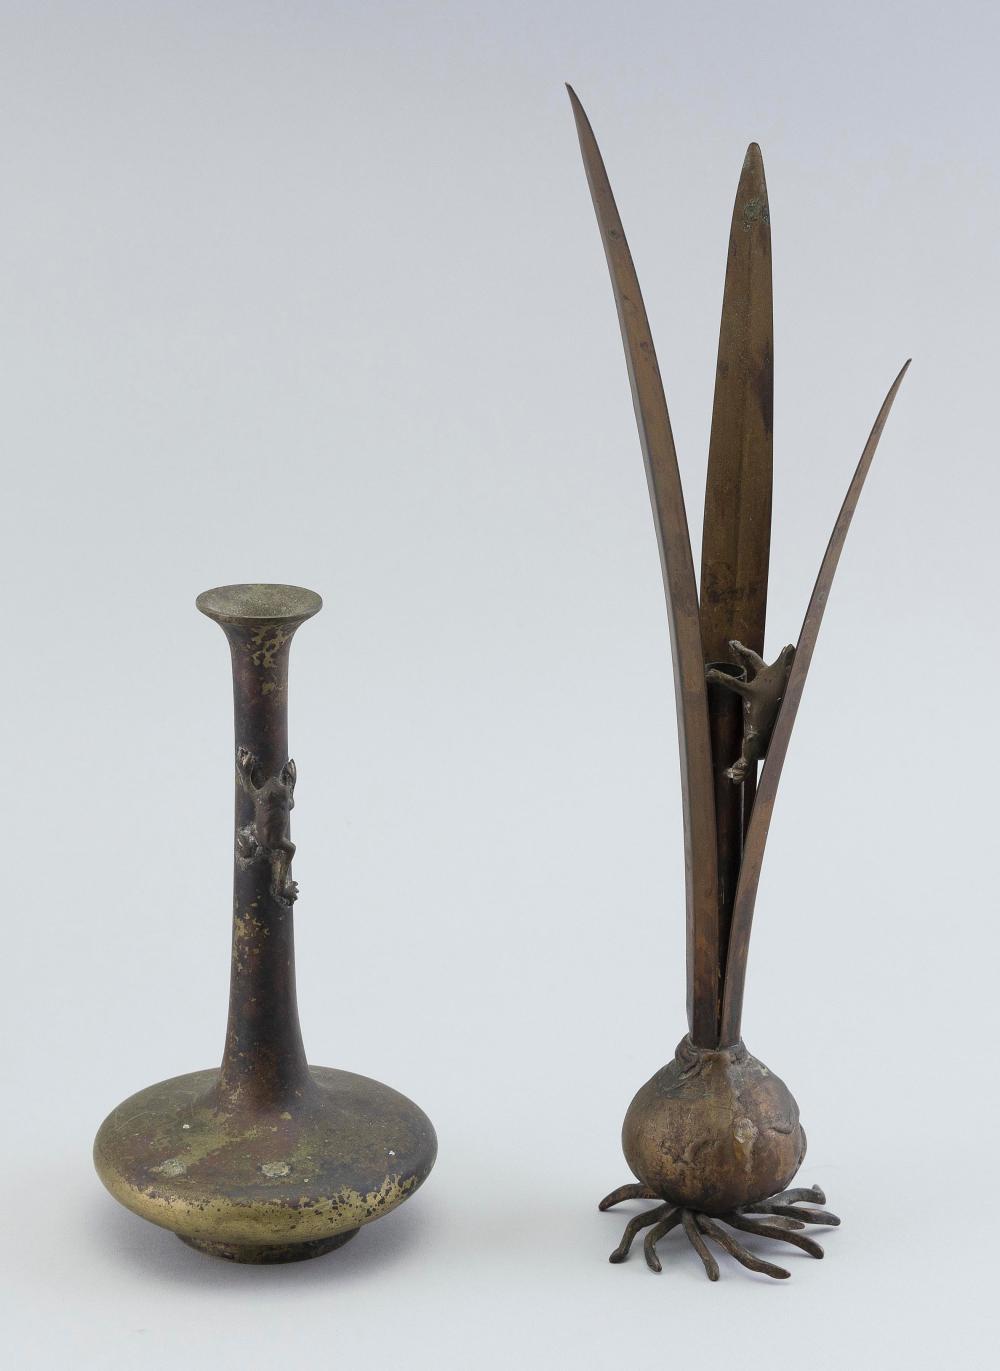 TWO BRONZE VASES WITH A FROG MOTIF 2f1e5c